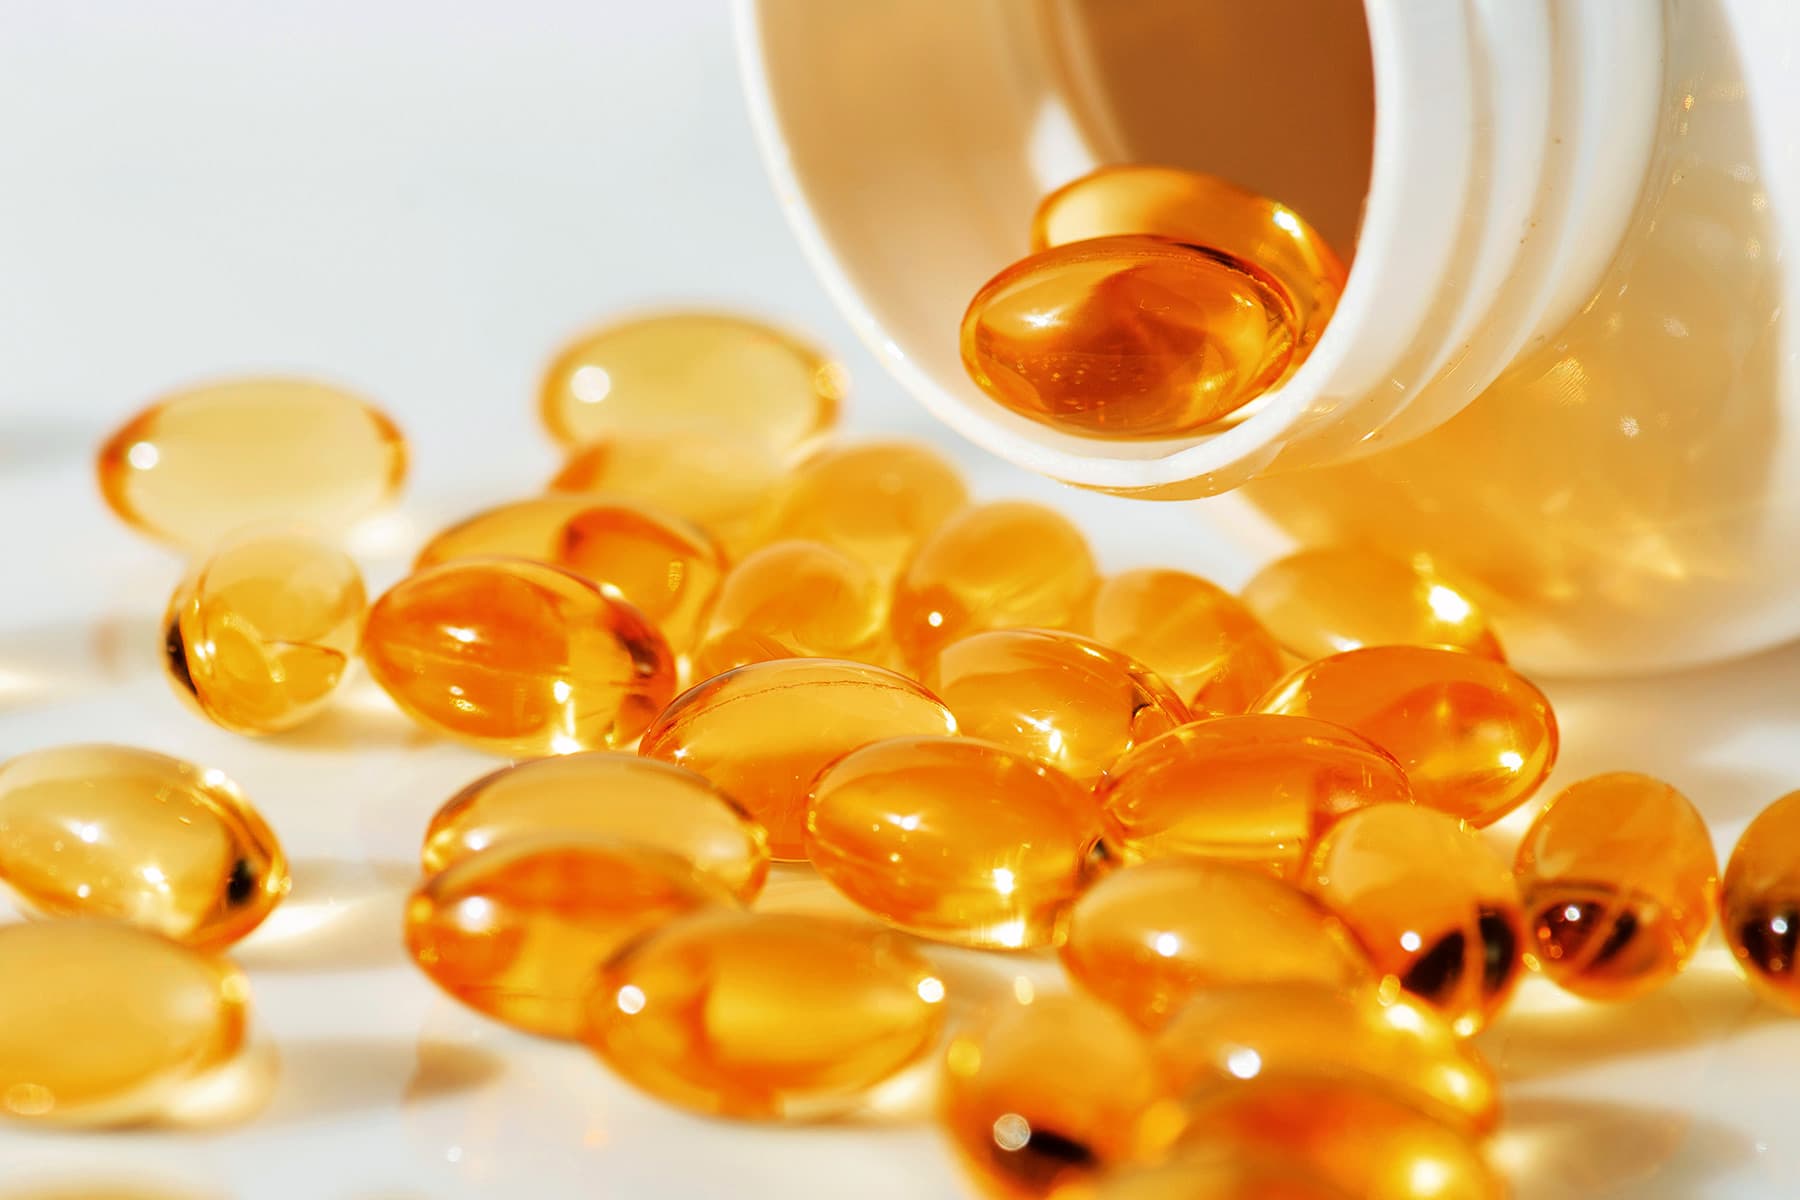 People With Cancer Should Be Wary of Taking Dietary Supplements